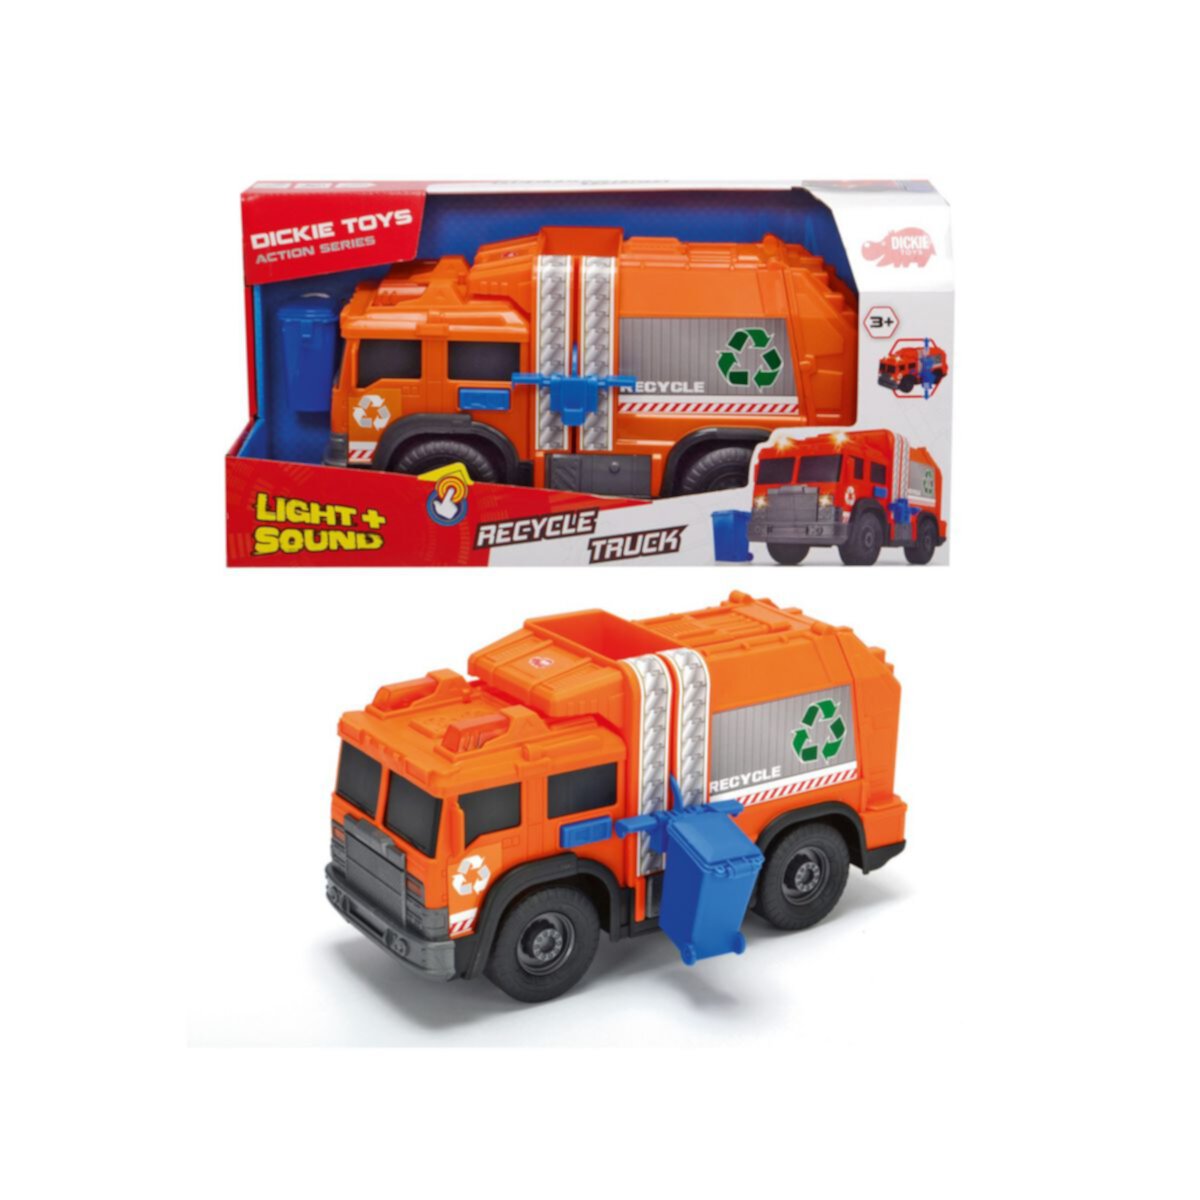 Dickie Toys Light & Sound Recycle Truck Dickie Toys